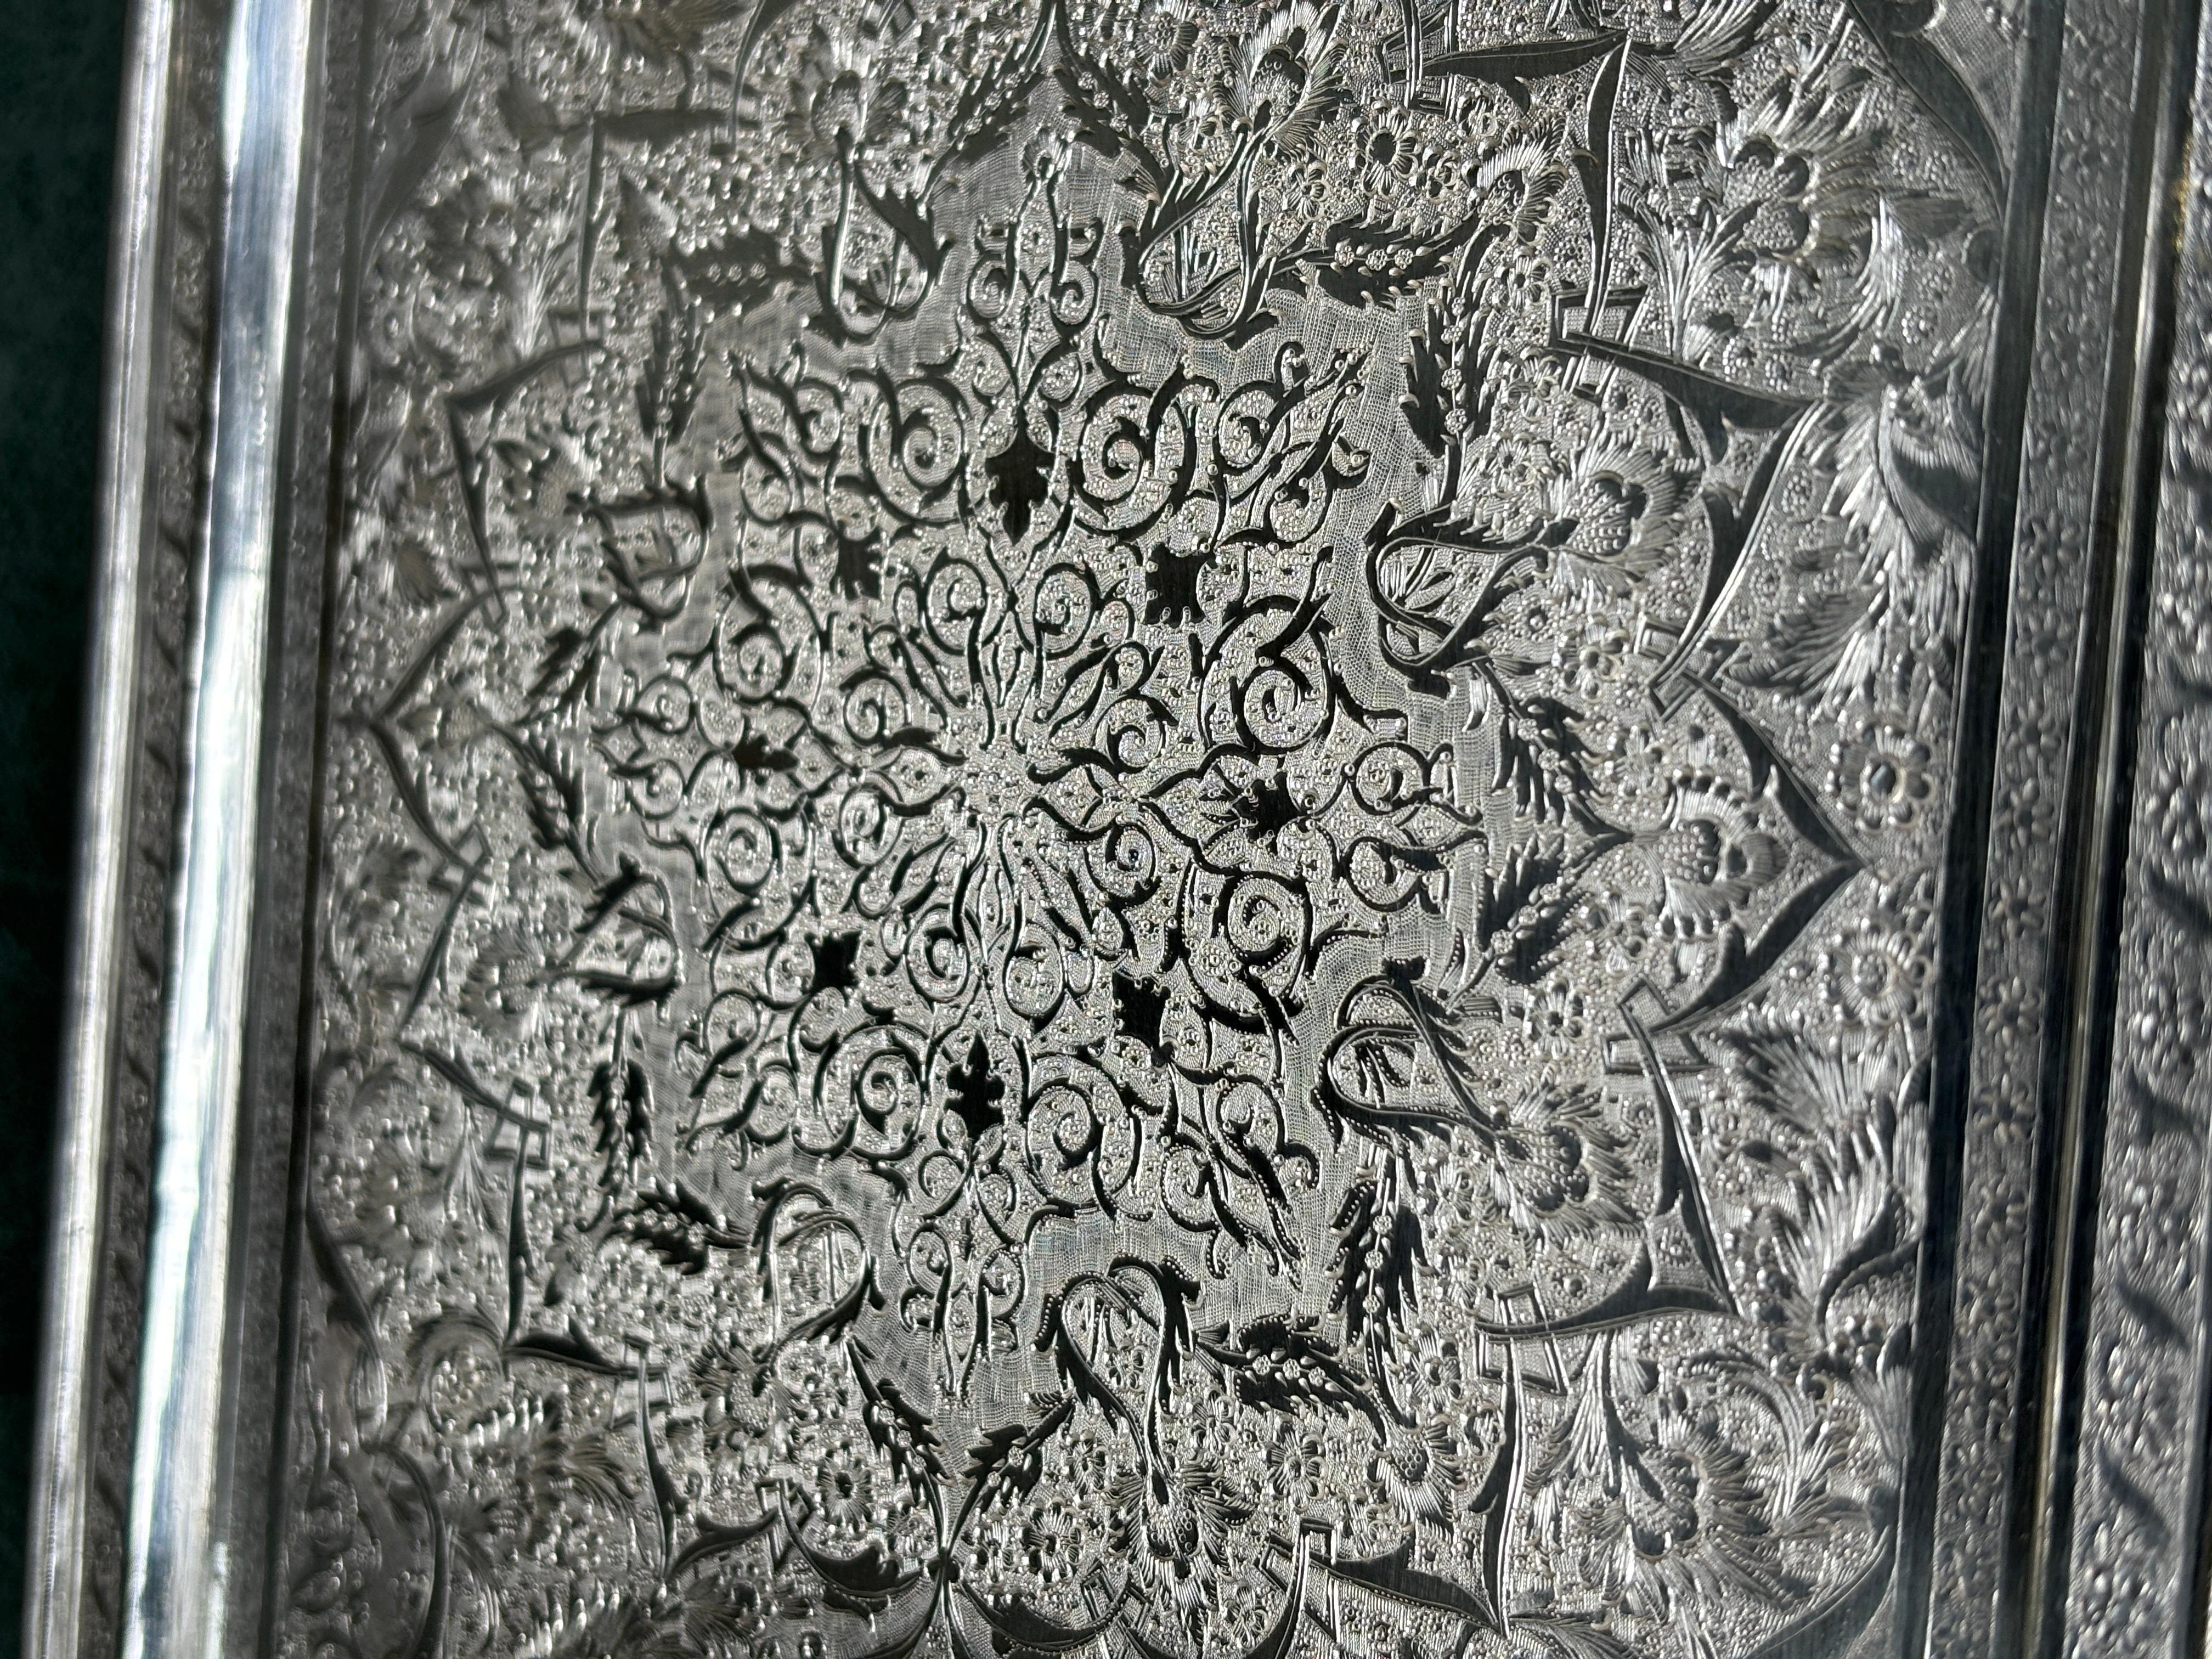 Women's or Men's Mid 20th Century Iranian Persian Middle Eastern Hand Chased Silver Tray  For Sale